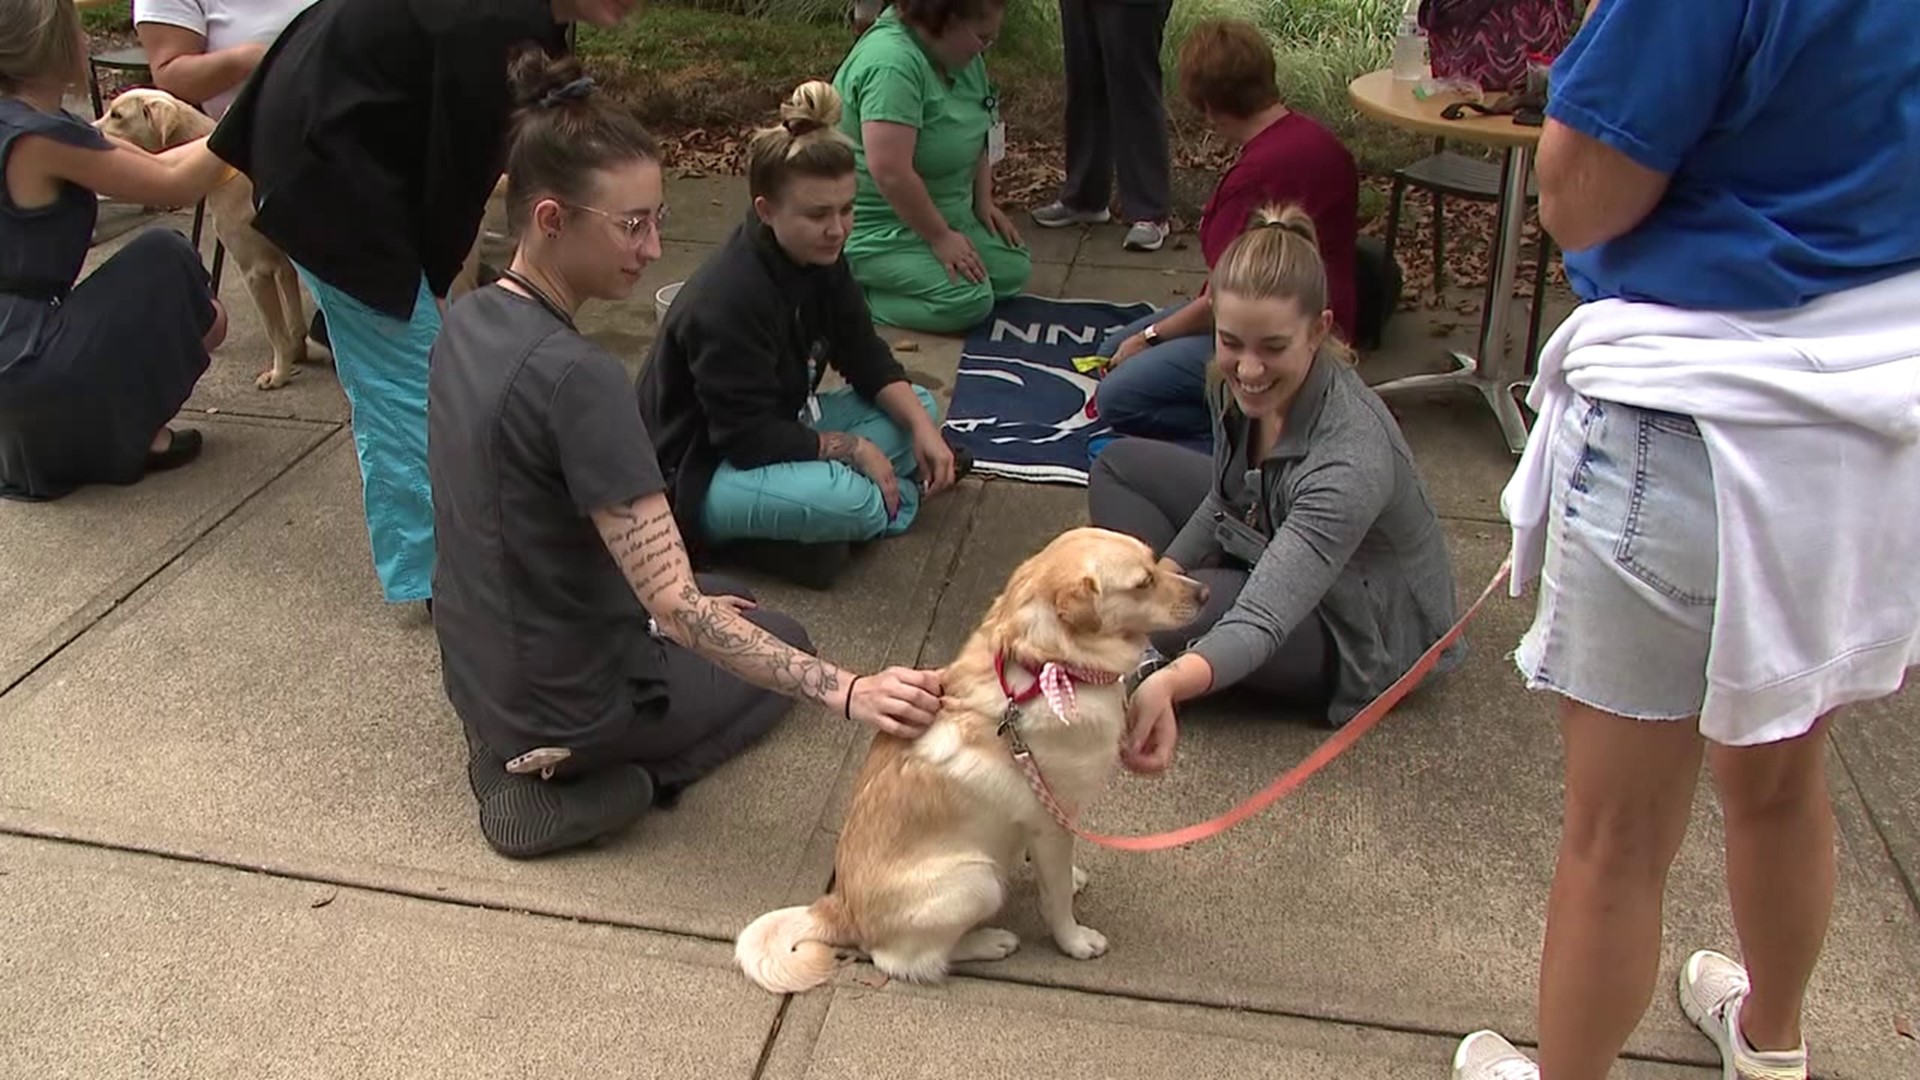 Geisinger employees got a treat Tuesday in the form of puppy love.